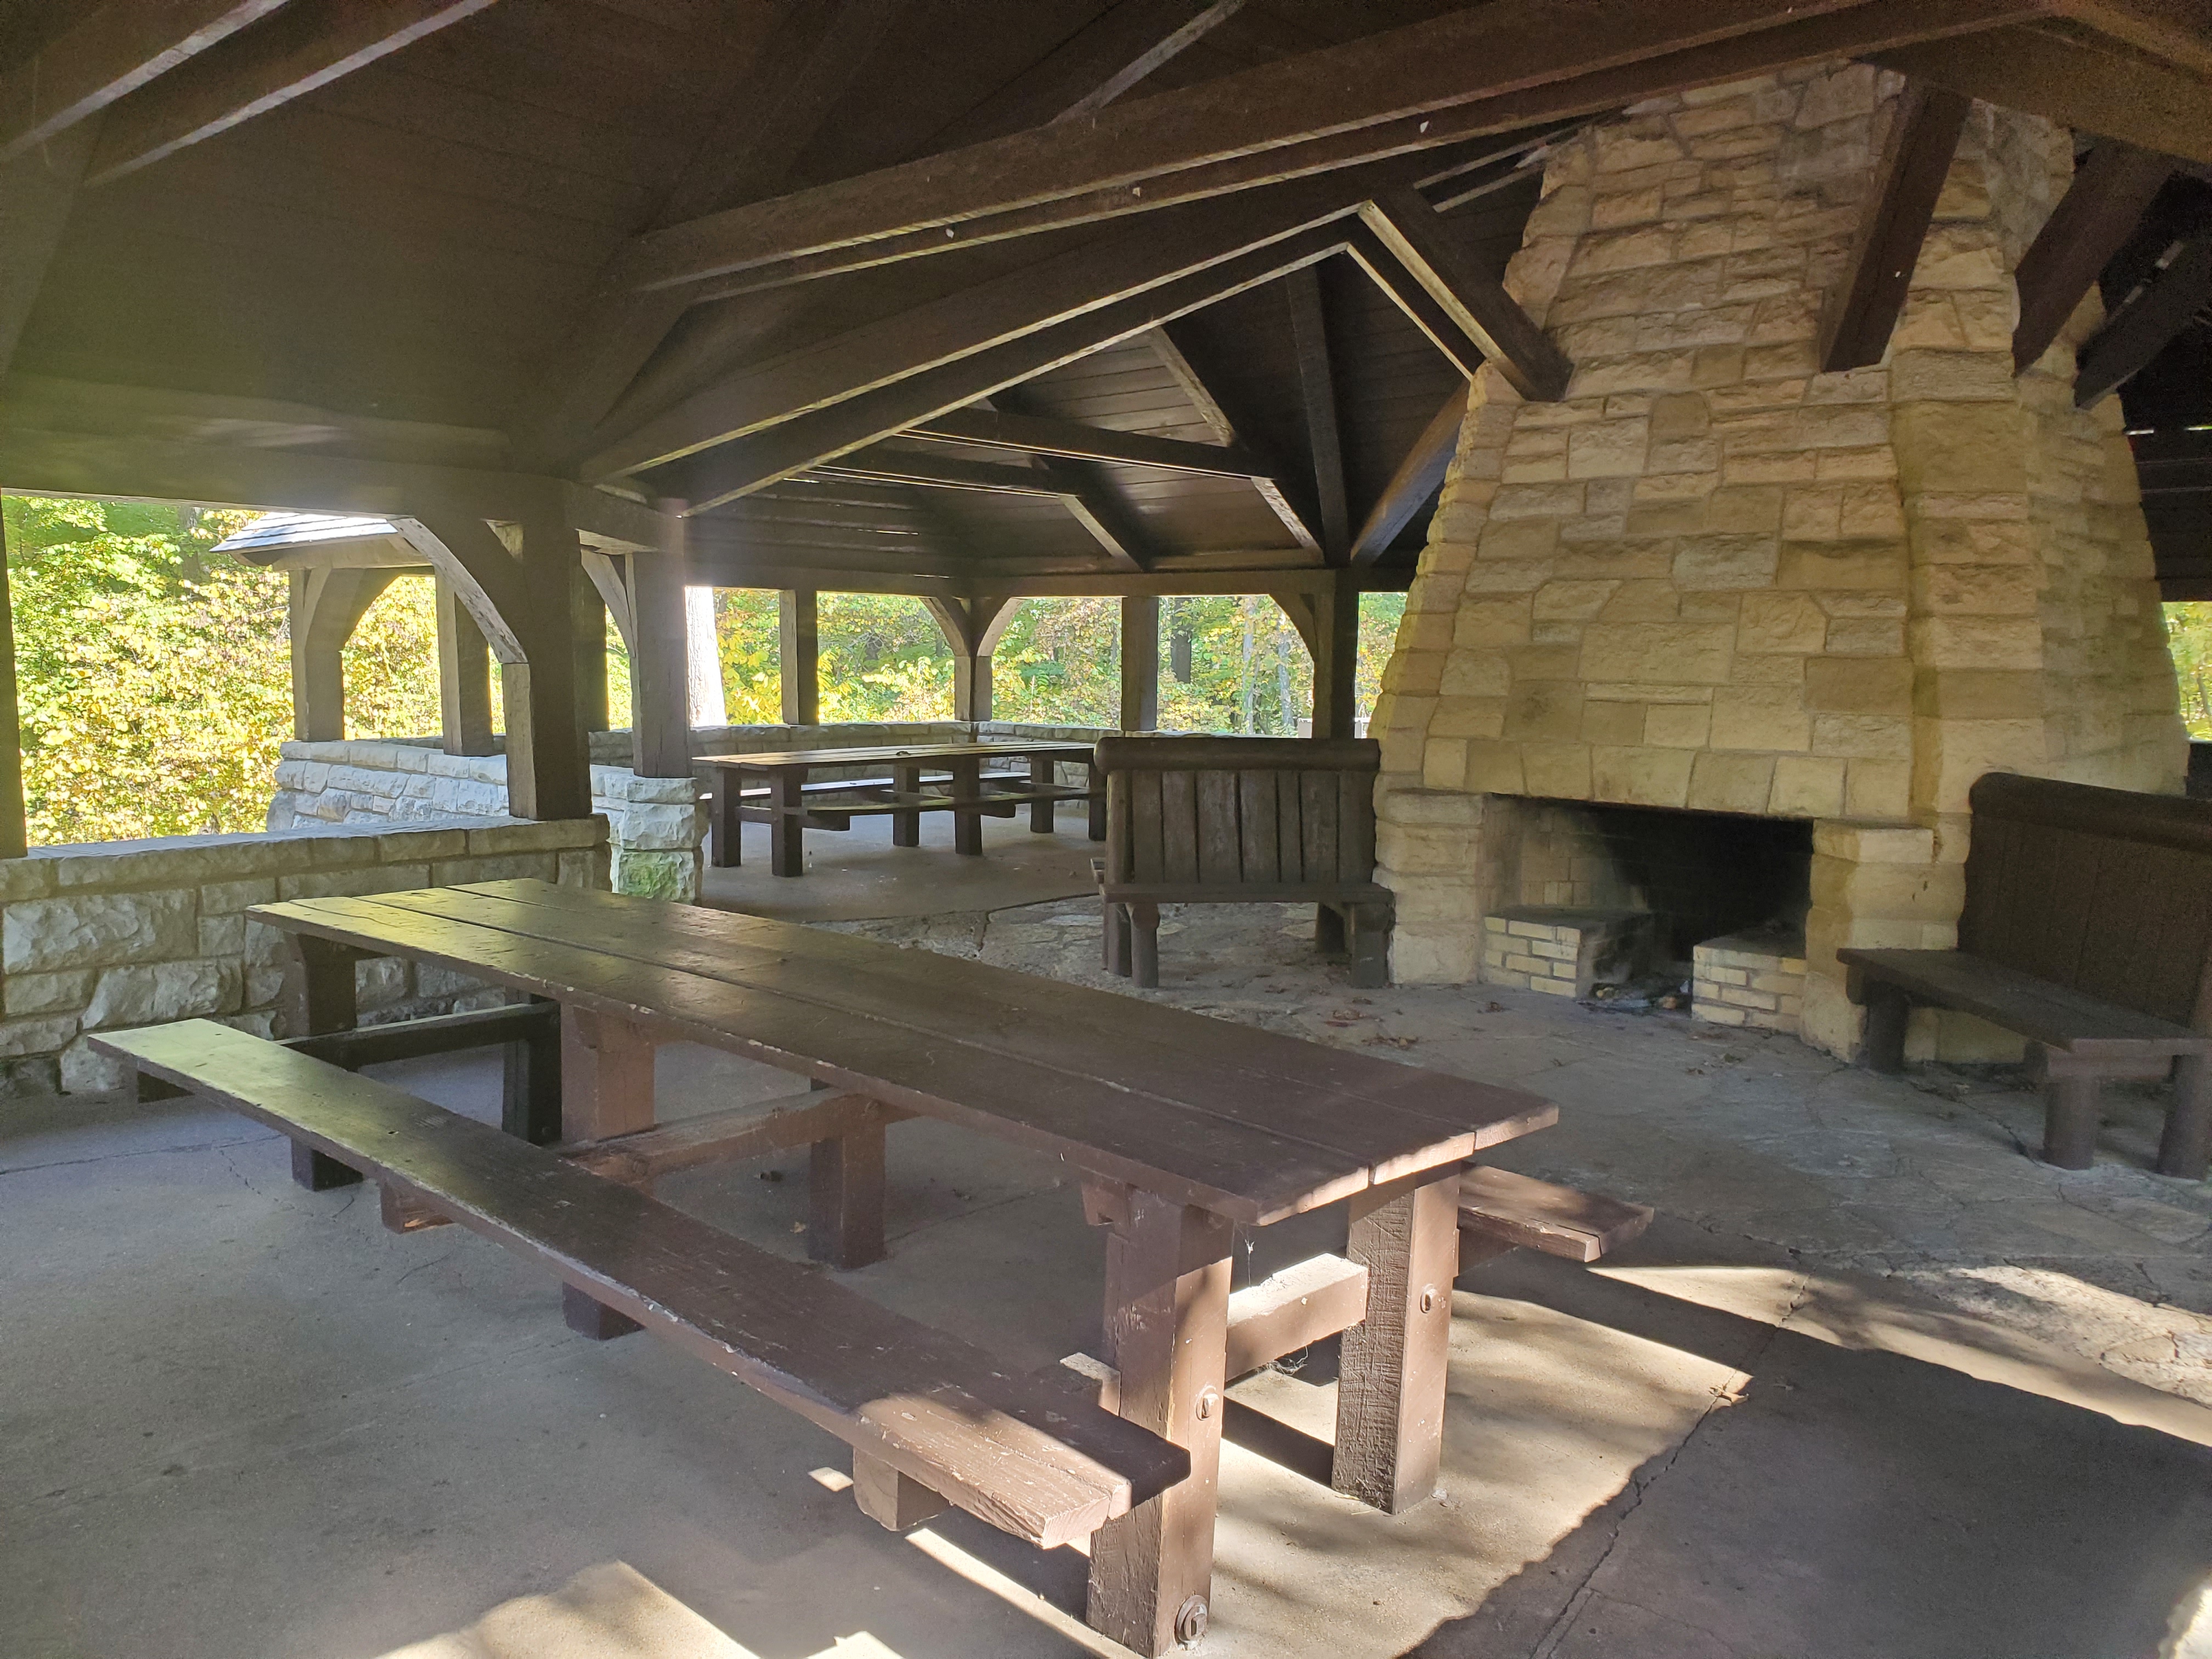 Wooden picnic tables and stone fireplace under the roof of the open shelter